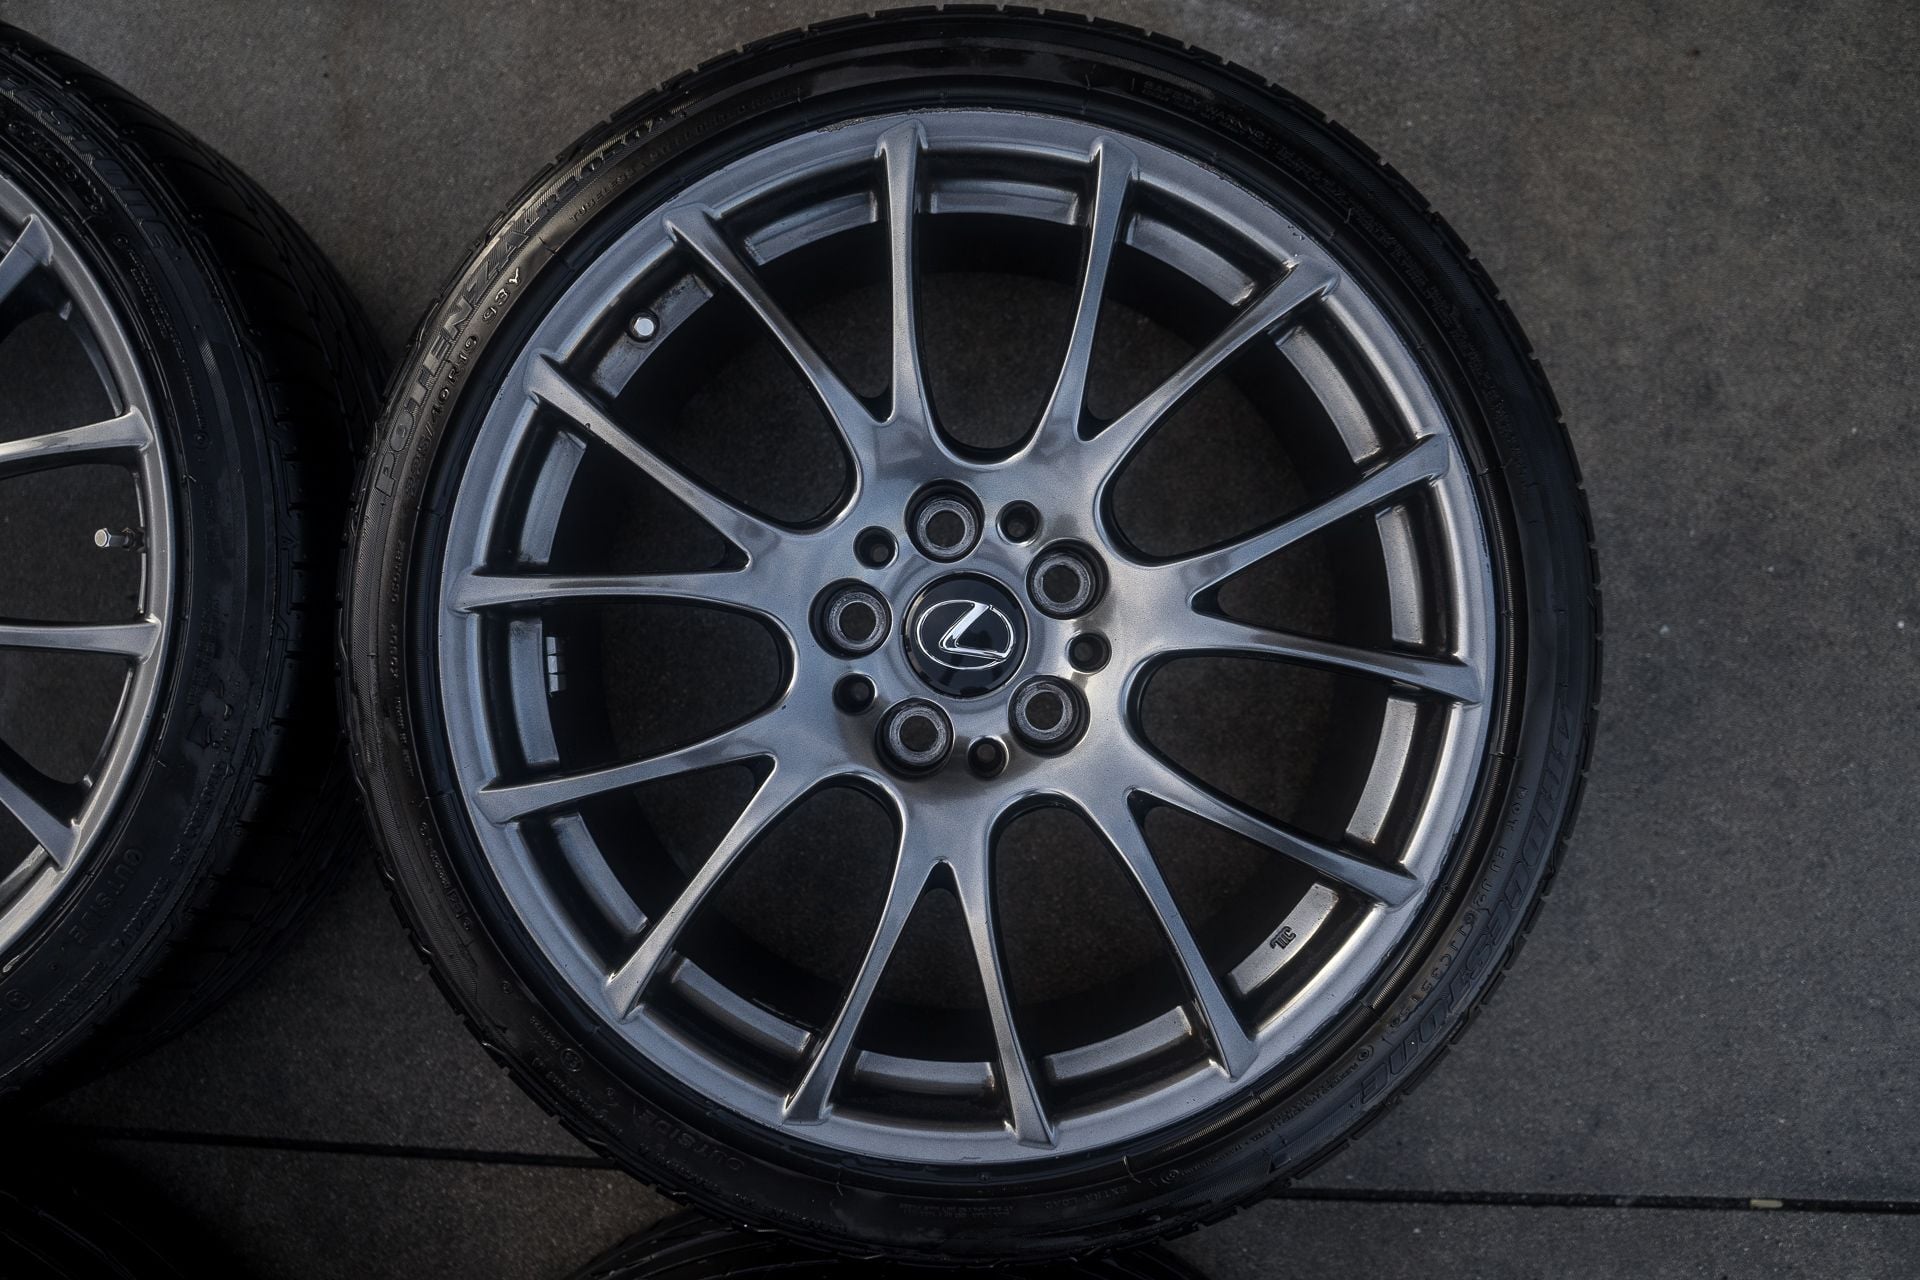 Wheels and Tires/Axles - 2012-2014 OEM BBS IS-F Wheels with Bridgestone Tires and TPMS - Used - 2008 to 2014 Lexus IS F - 2006 to 2019 Lexus IS250 - 2015 to 2019 Lexus IS200t - 2006 to 2019 Lexus IS350 - 2013 to 2019 Lexus GS350 - 2015 to 2019 Lexus RC F - 2015 to 2019 Lexus GS F - 2015 to 2019 Lexus GS200t - Laguna Niguel, CA 92677, United States